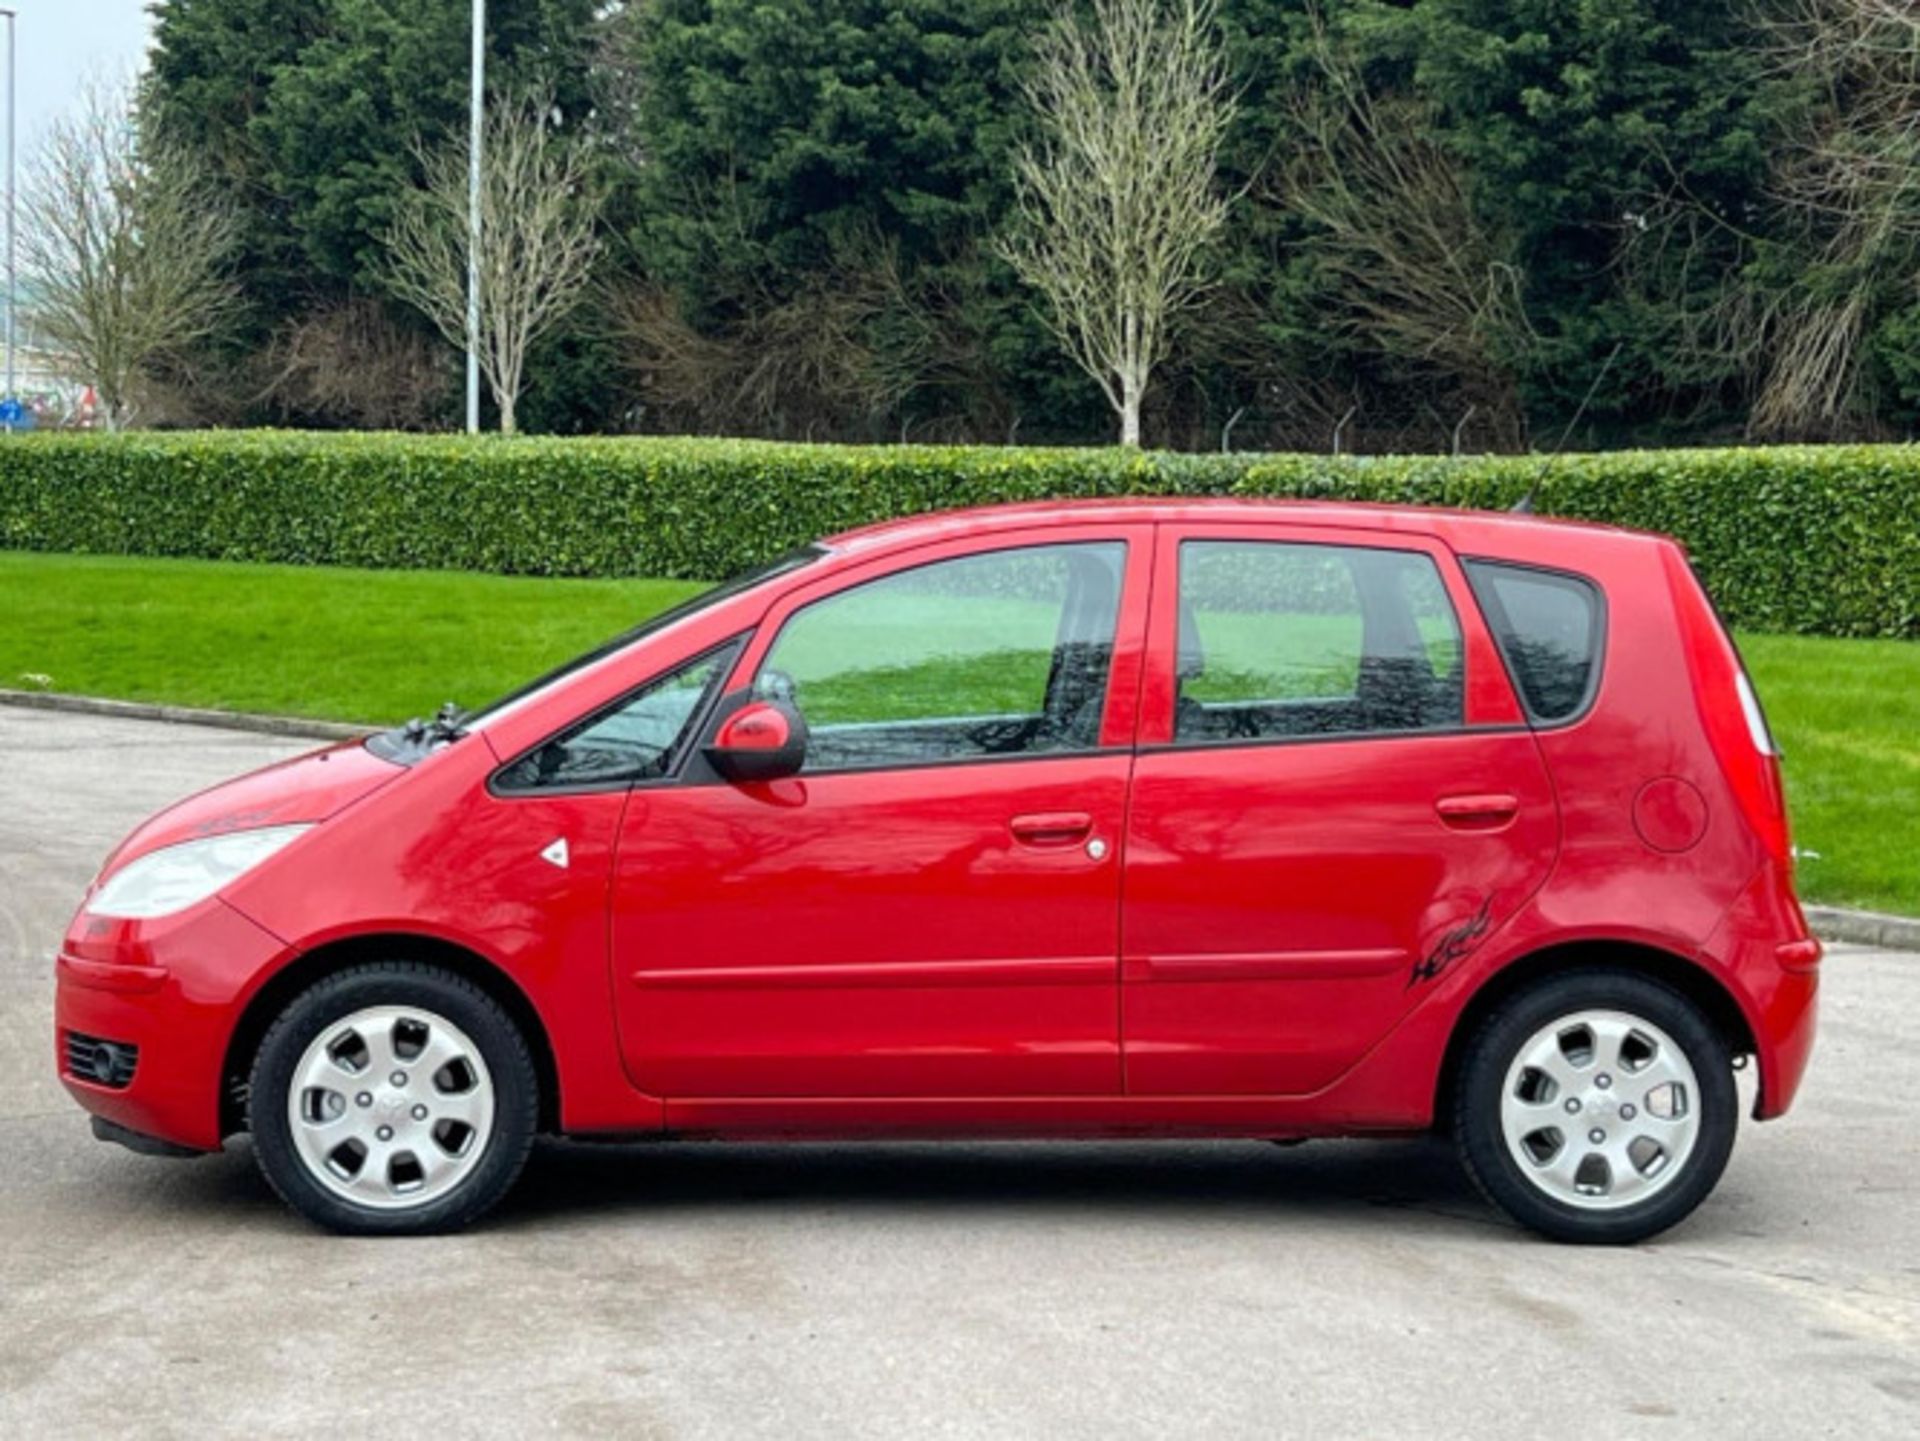 2007 MITSUBISHI COLT 1.5 DI-D DIESEL AUTOMATIC >>--NO VAT ON HAMMER--<< - Image 184 of 191